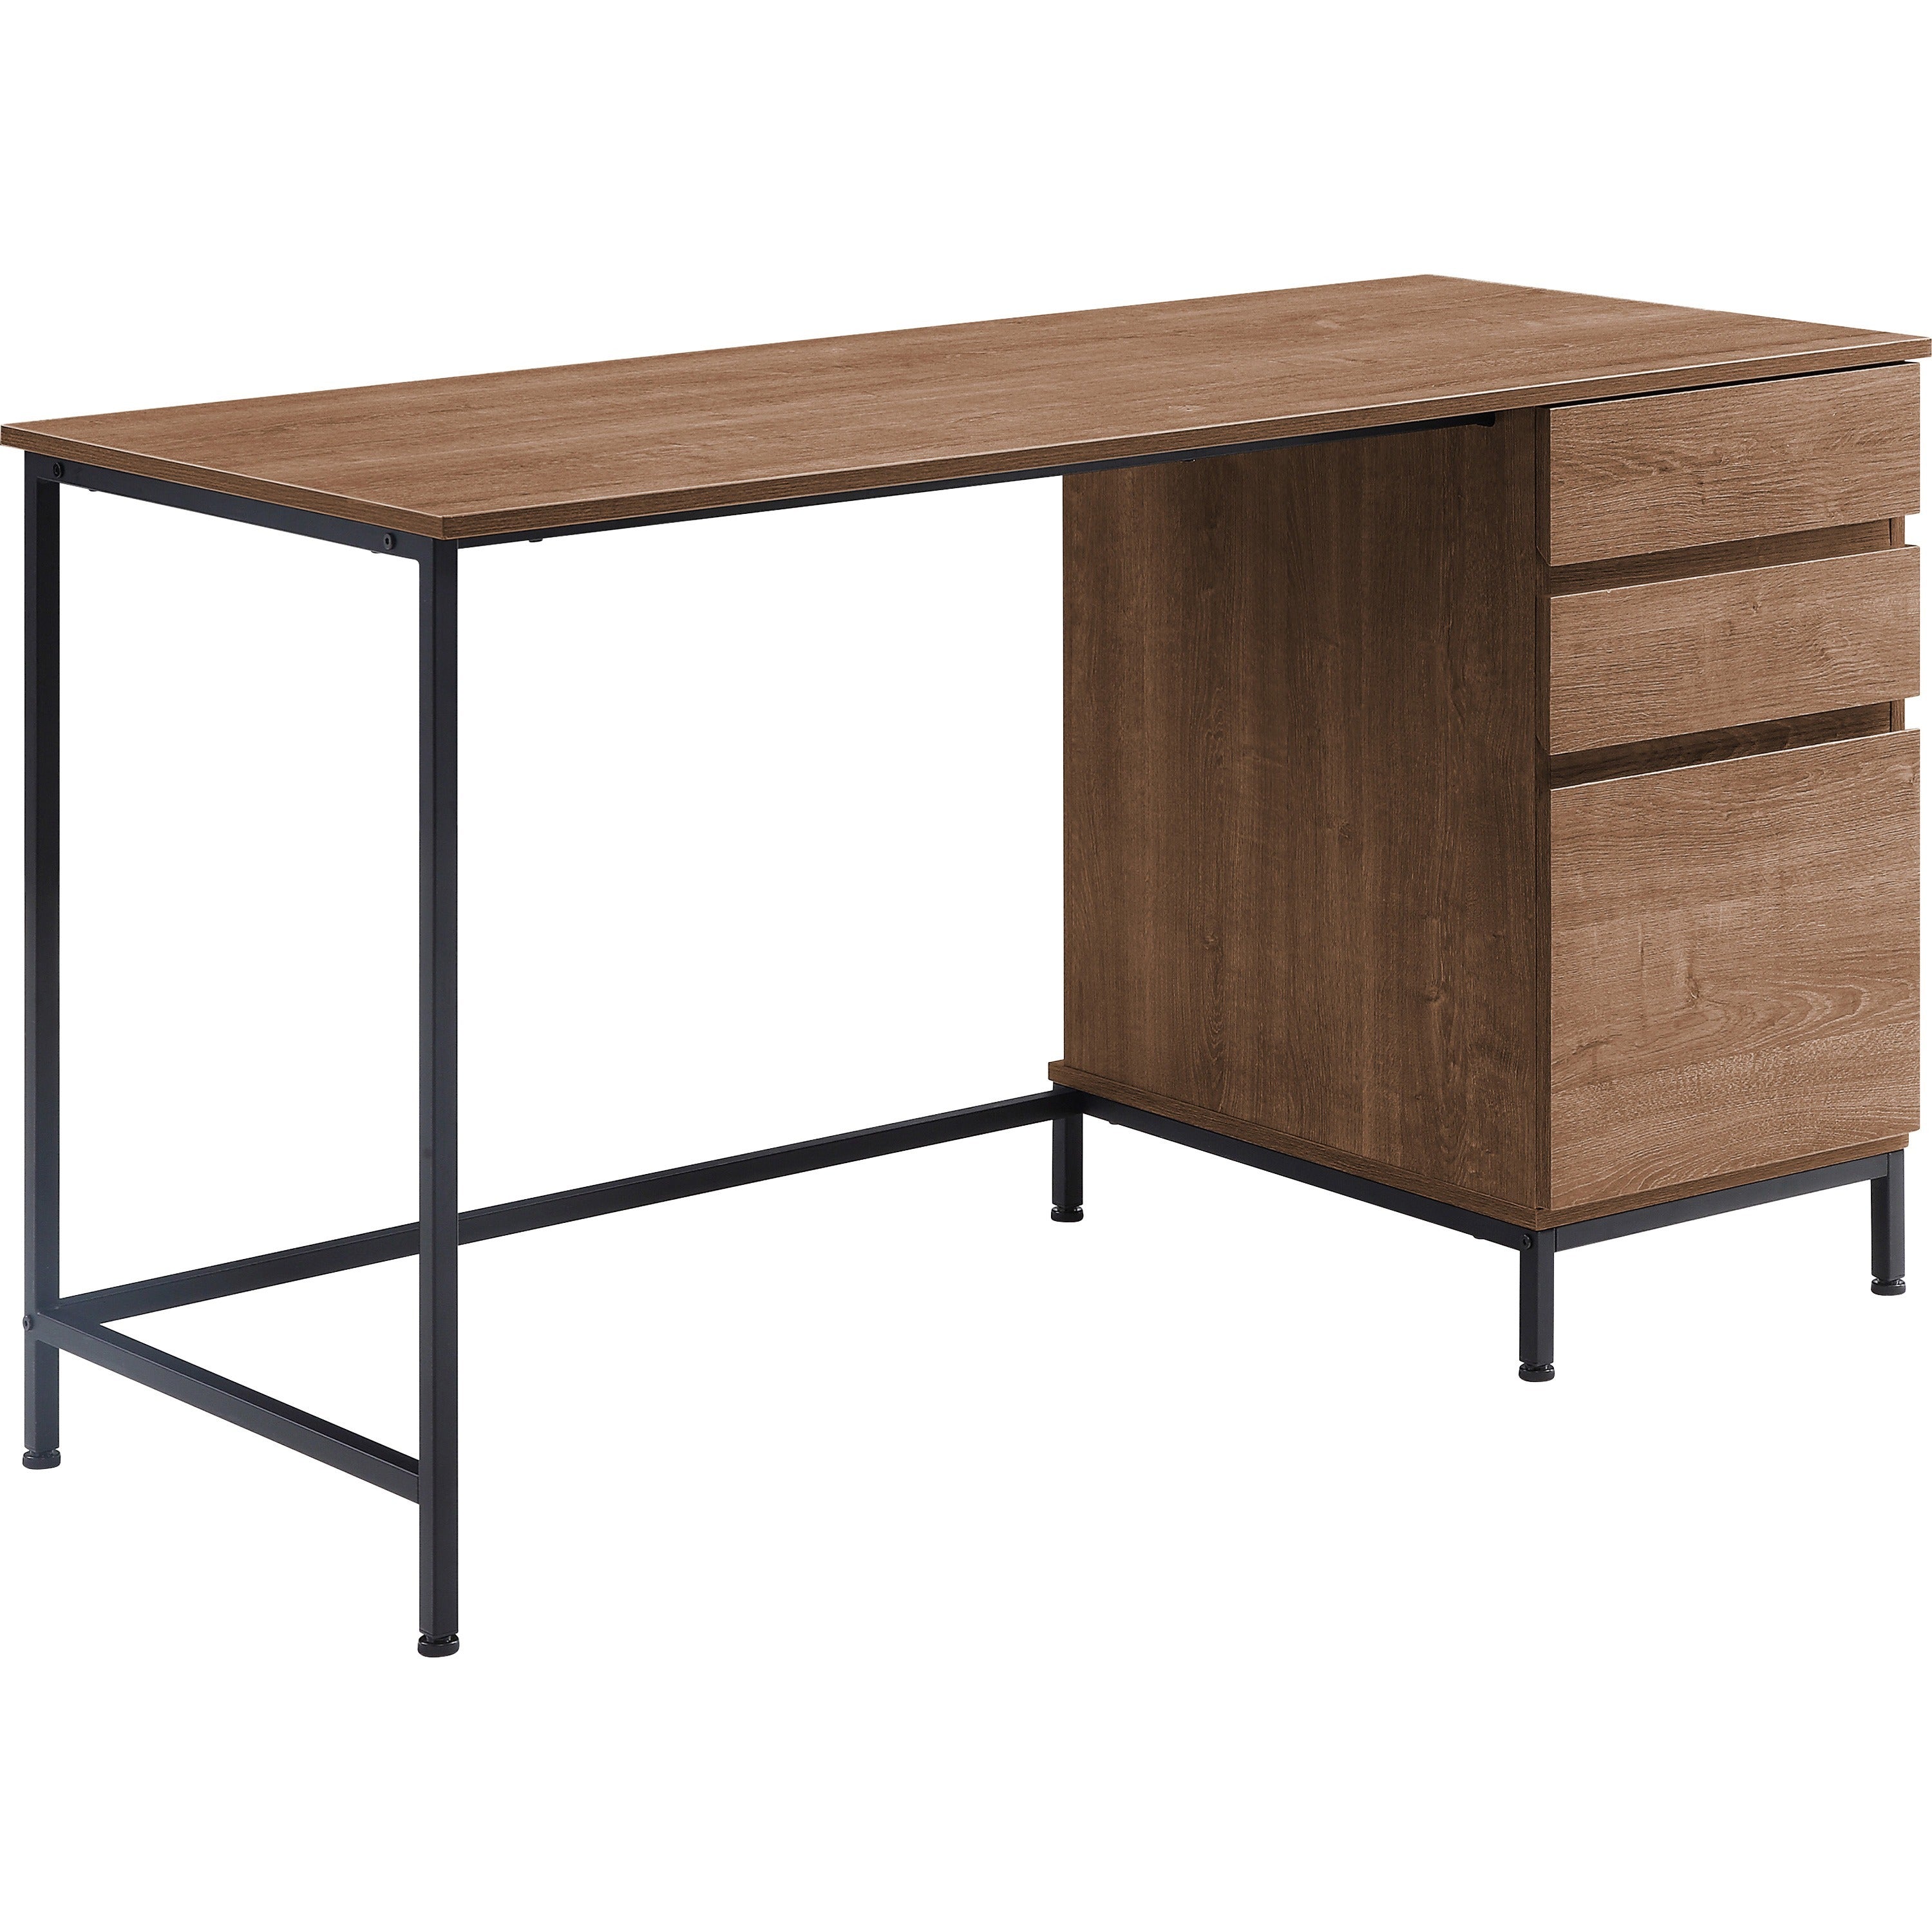 lorell-soho-desk-with-side-drawers-55-x-23630-3-x-file-drawers-single-pedestal-on-right-side-finish-walnut_llr97615 - 1